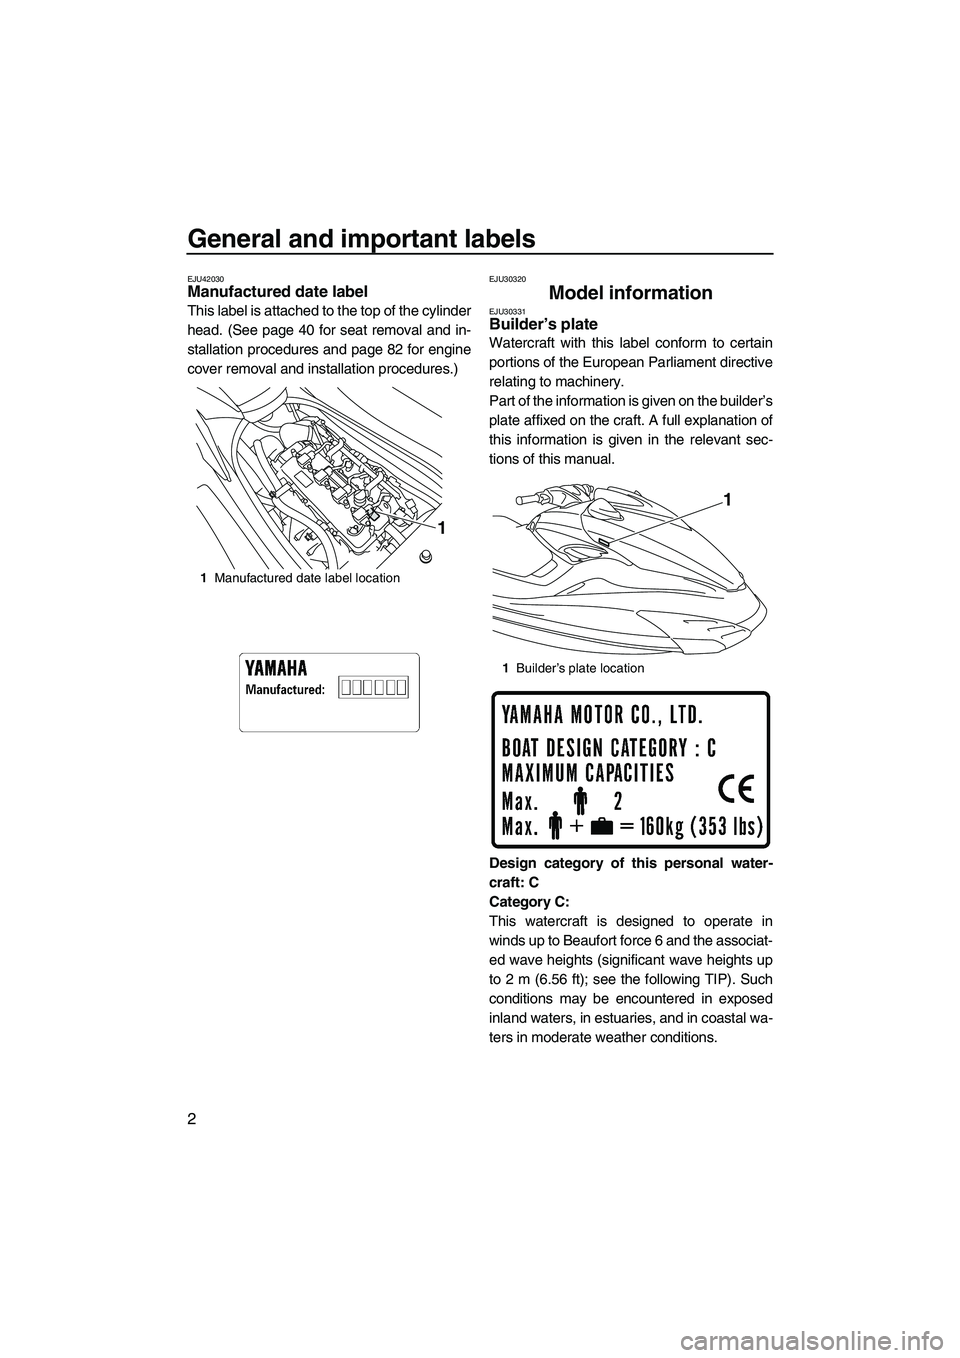 YAMAHA FZR 2012  Owners Manual General and important labels
2
EJU42030Manufactured date label 
This label is attached to the top of the cylinder
head. (See page 40 for seat removal and in-
stallation procedures and page 82 for engi